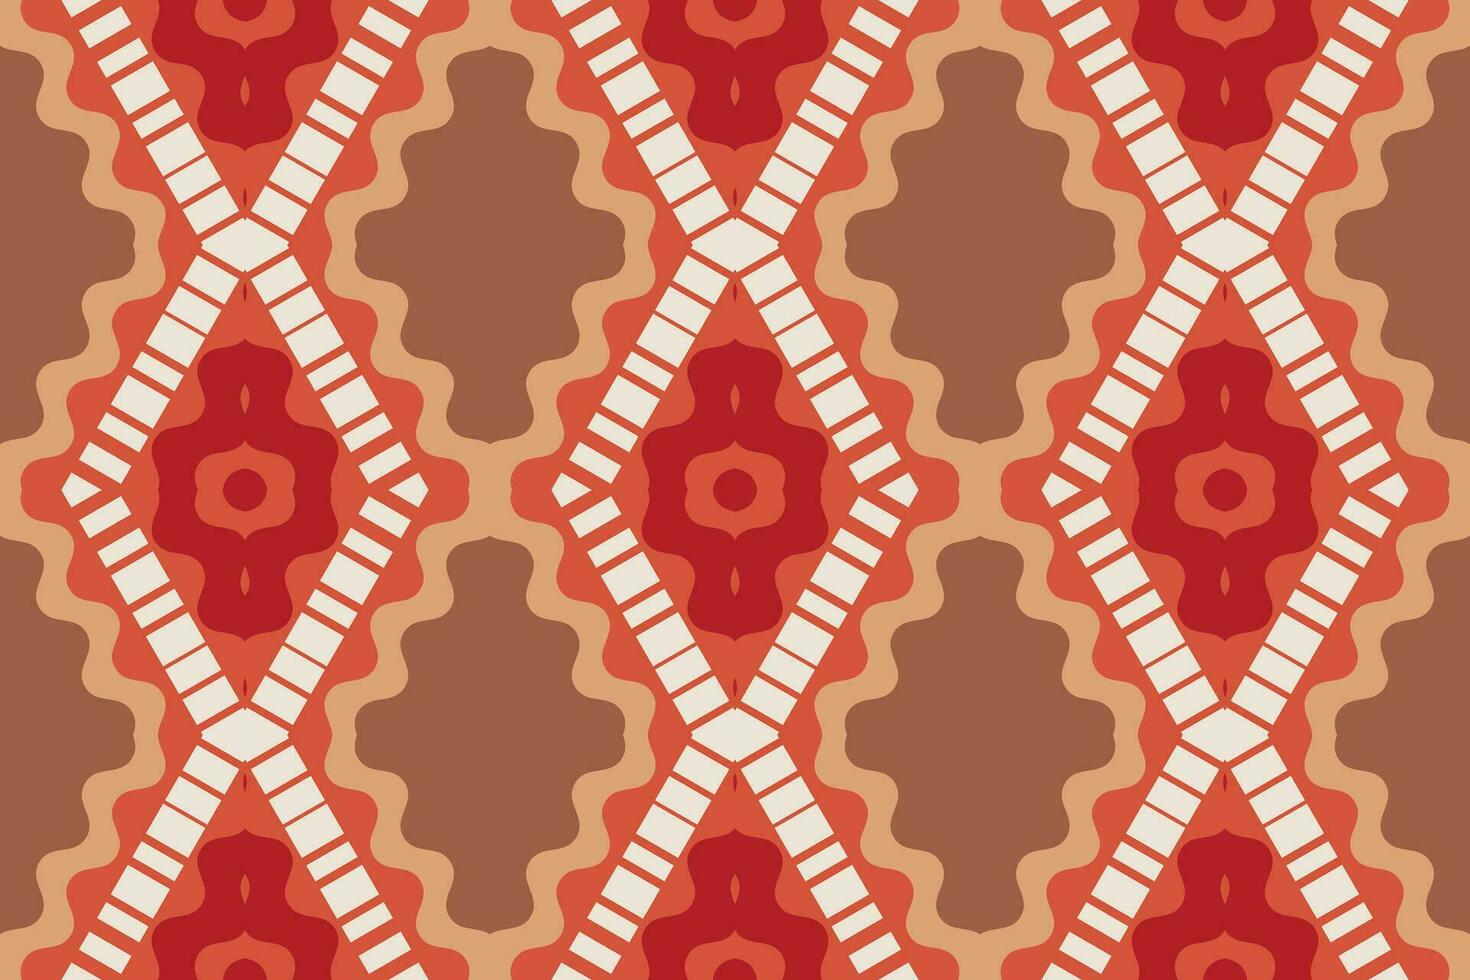 Ikat Floral Paisley Embroidery Background. Ikat Fabric Geometric Ethnic Oriental Pattern traditional.aztec Style Abstract Vector illustration.design for Texture,fabric,clothing,wrapping,sarong.